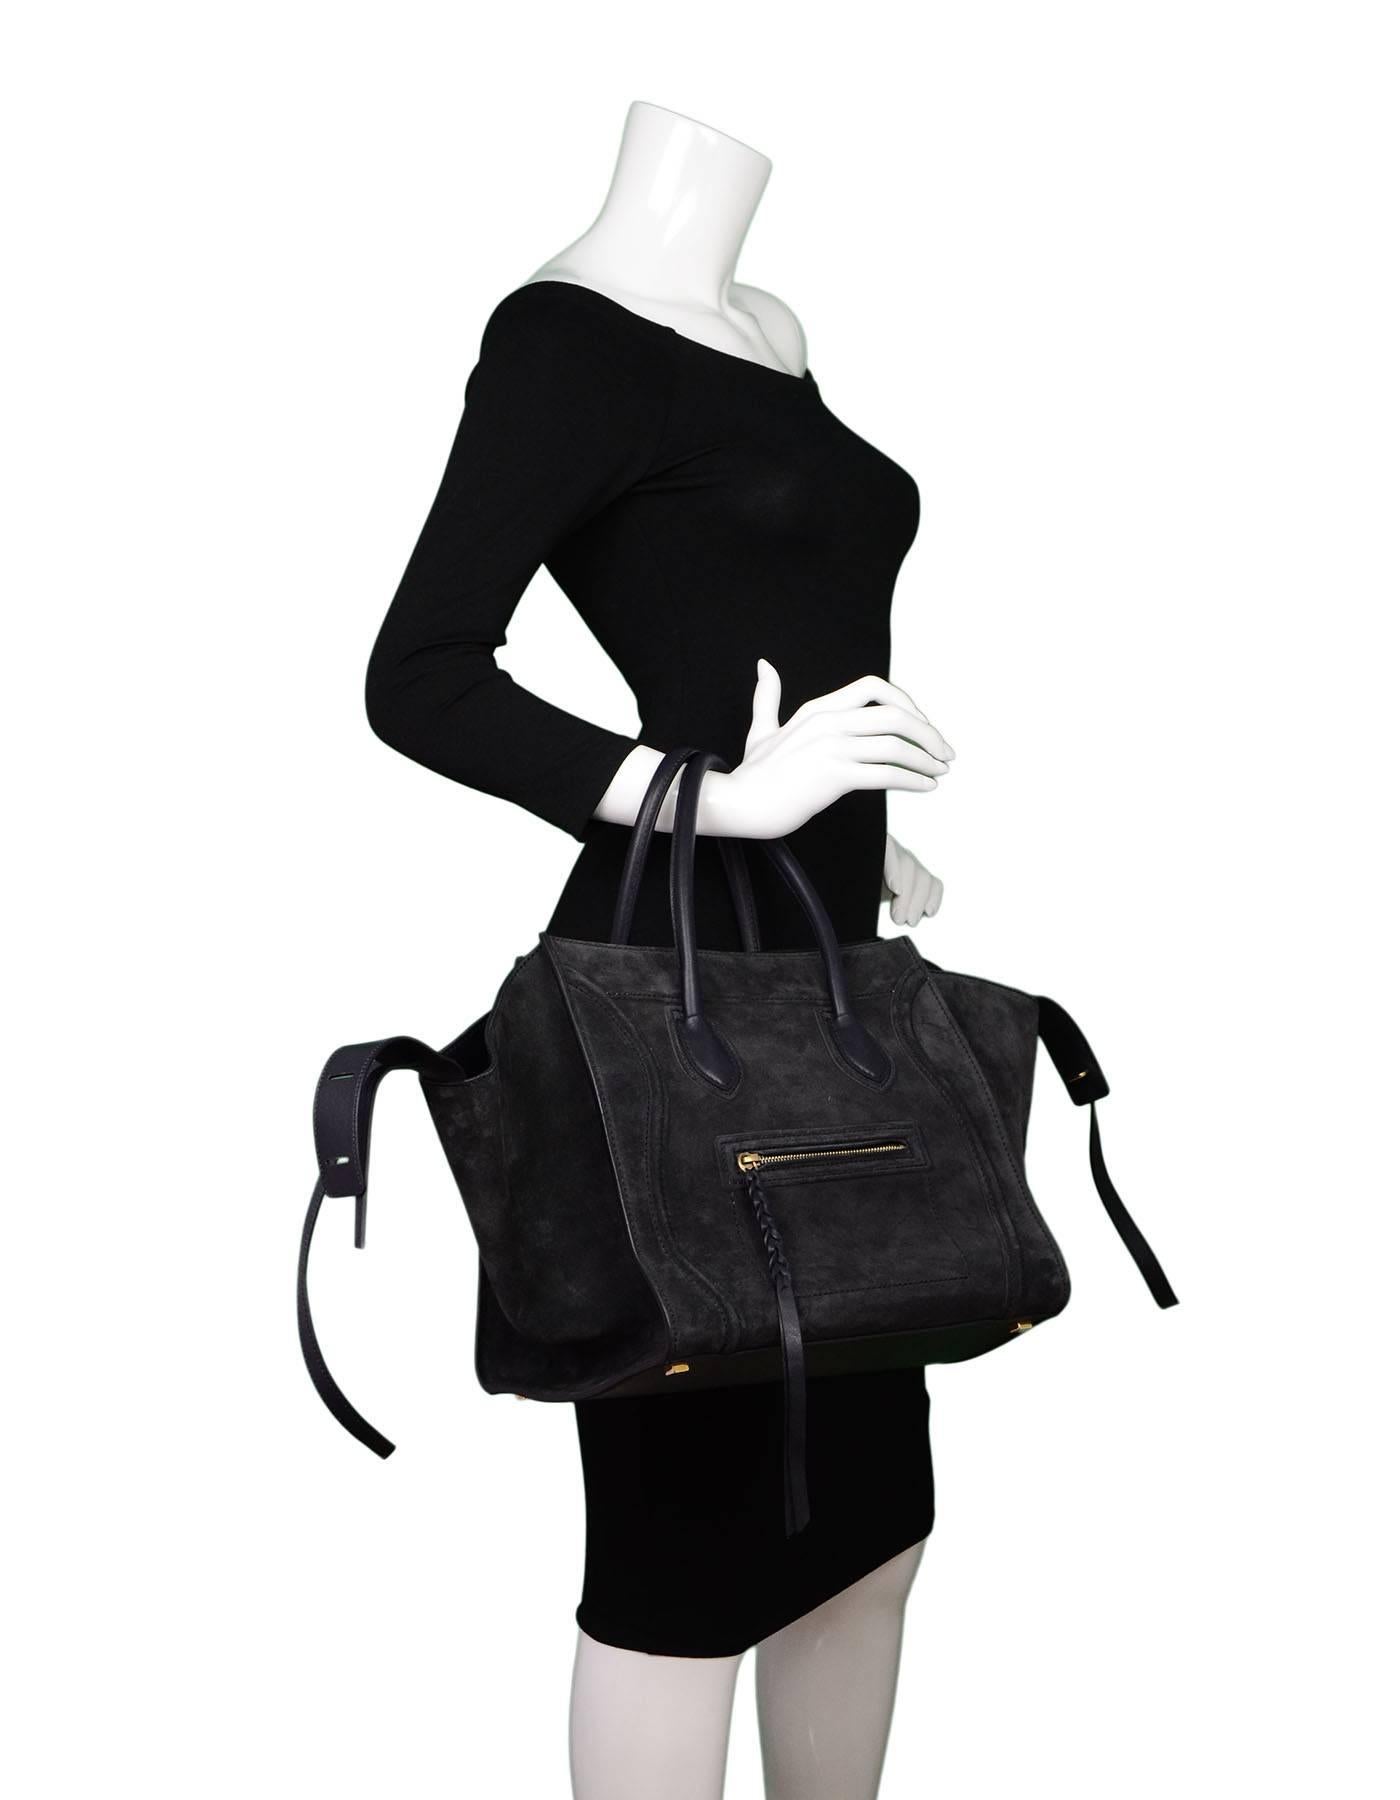 Celine Medium Midnight Suede Phantom Tote

Made In: Italy
Color: Midnight, dark blue
Hardware: Goldtone
Materials: Suede, leather
Lining: Leather
Closure/Opening: Open top with center tassel closure
Exterior Pockets: One front zipper pocket
Interior